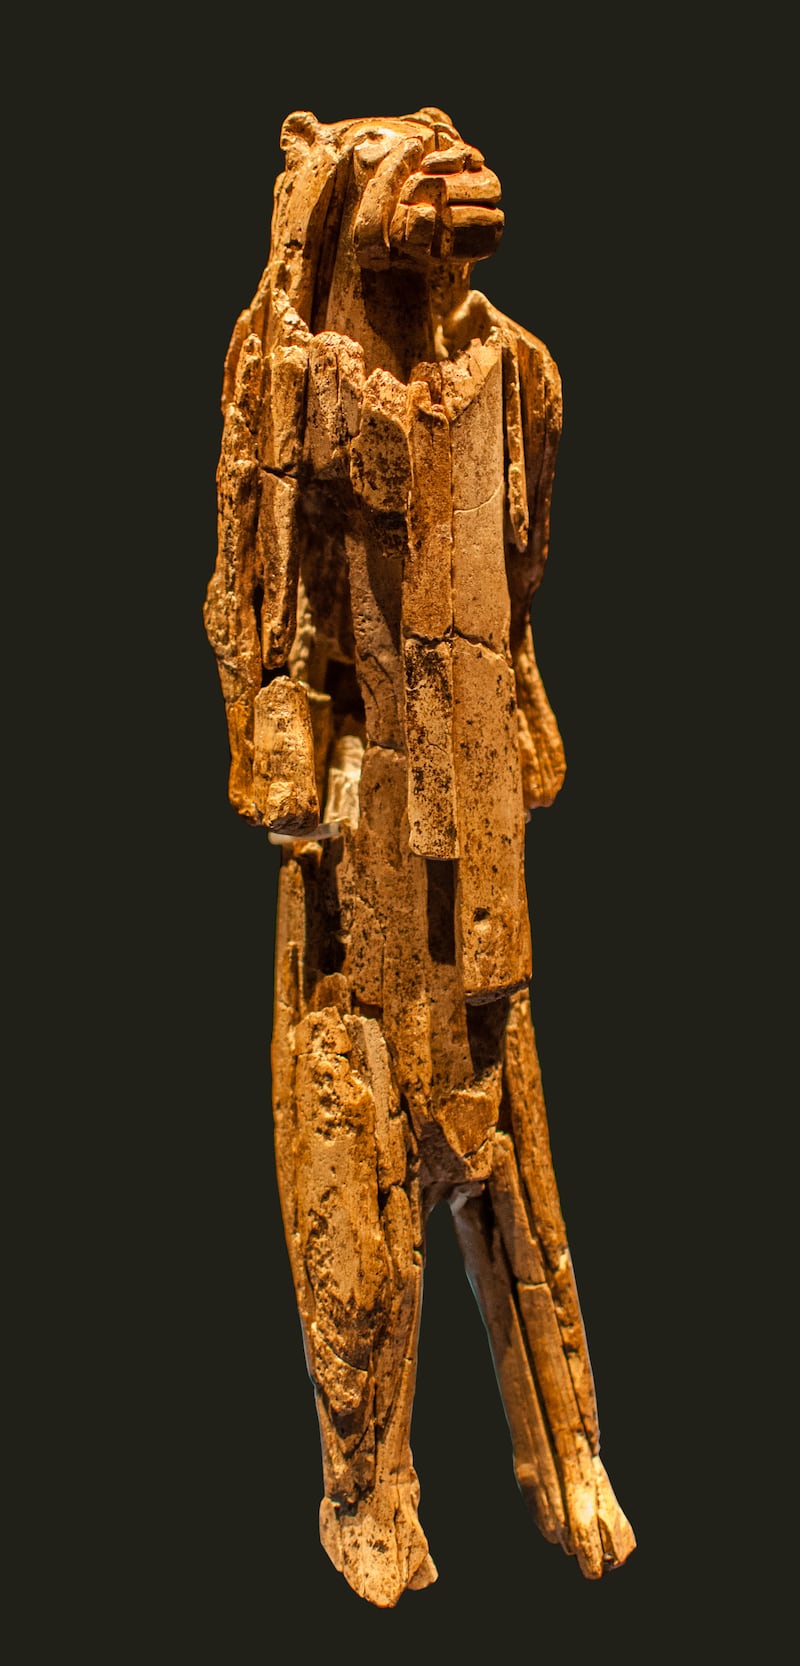 This artefact made from woolly mammoth ivory called the Lion-Man was found in the Hohlenstein-Stadel Cave, Germany. Photo: Dagmar Hollmann